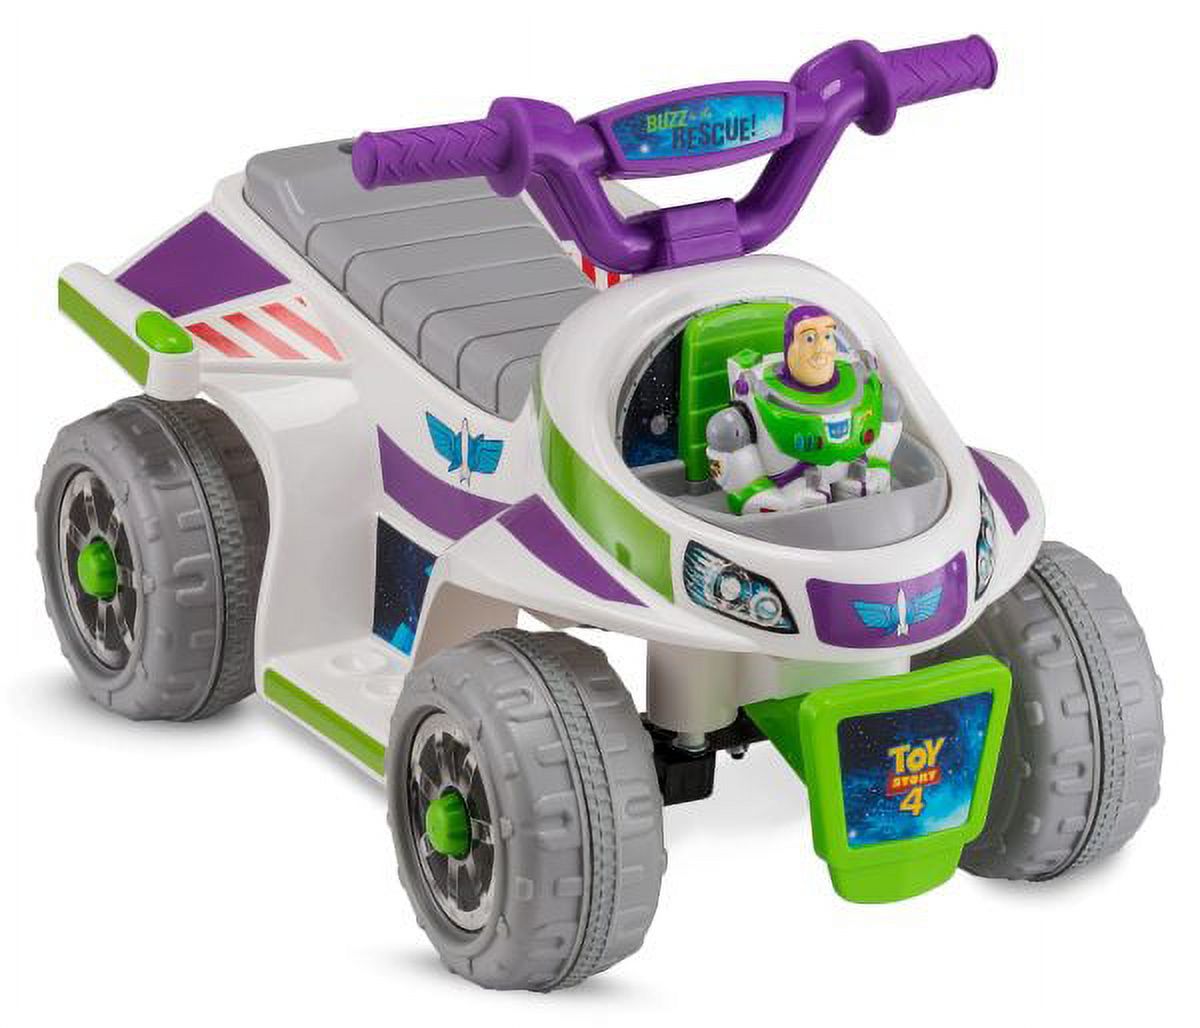 Pacific Cycle 6v Toy Story Buzz Lightyear Quad - image 4 of 7